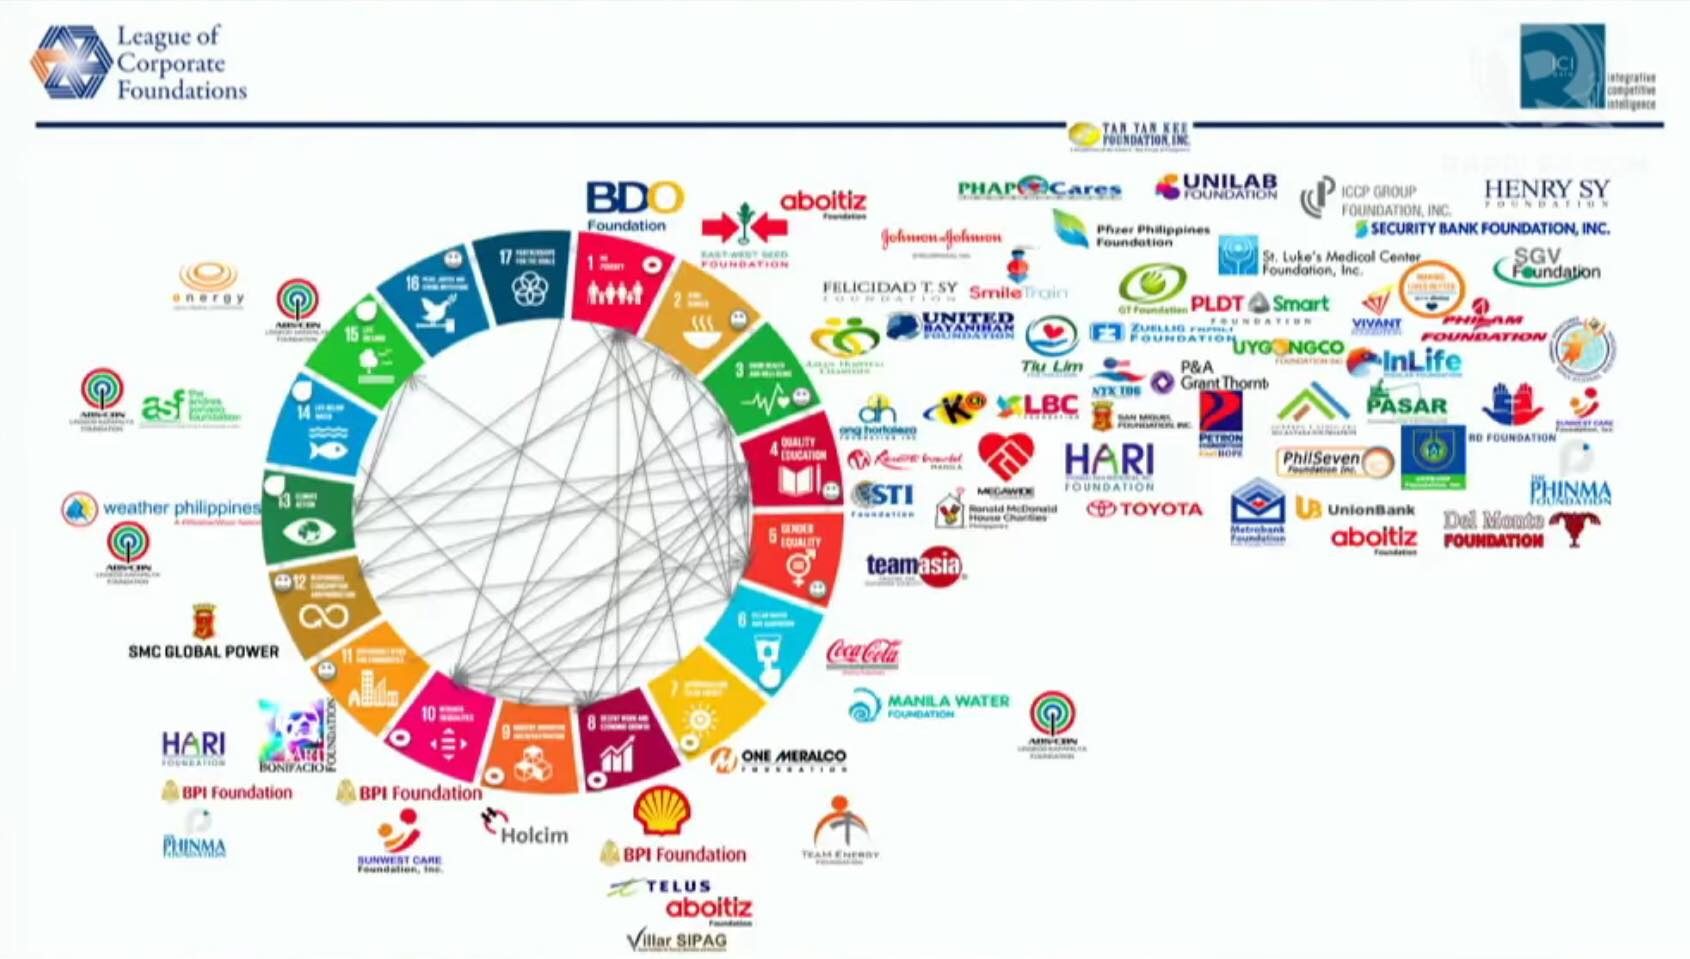 GOALS. Companies tend to focus on only a few of the Sustainable Development Goals, according to the League of Corporate Foundations. Graph by LCF 